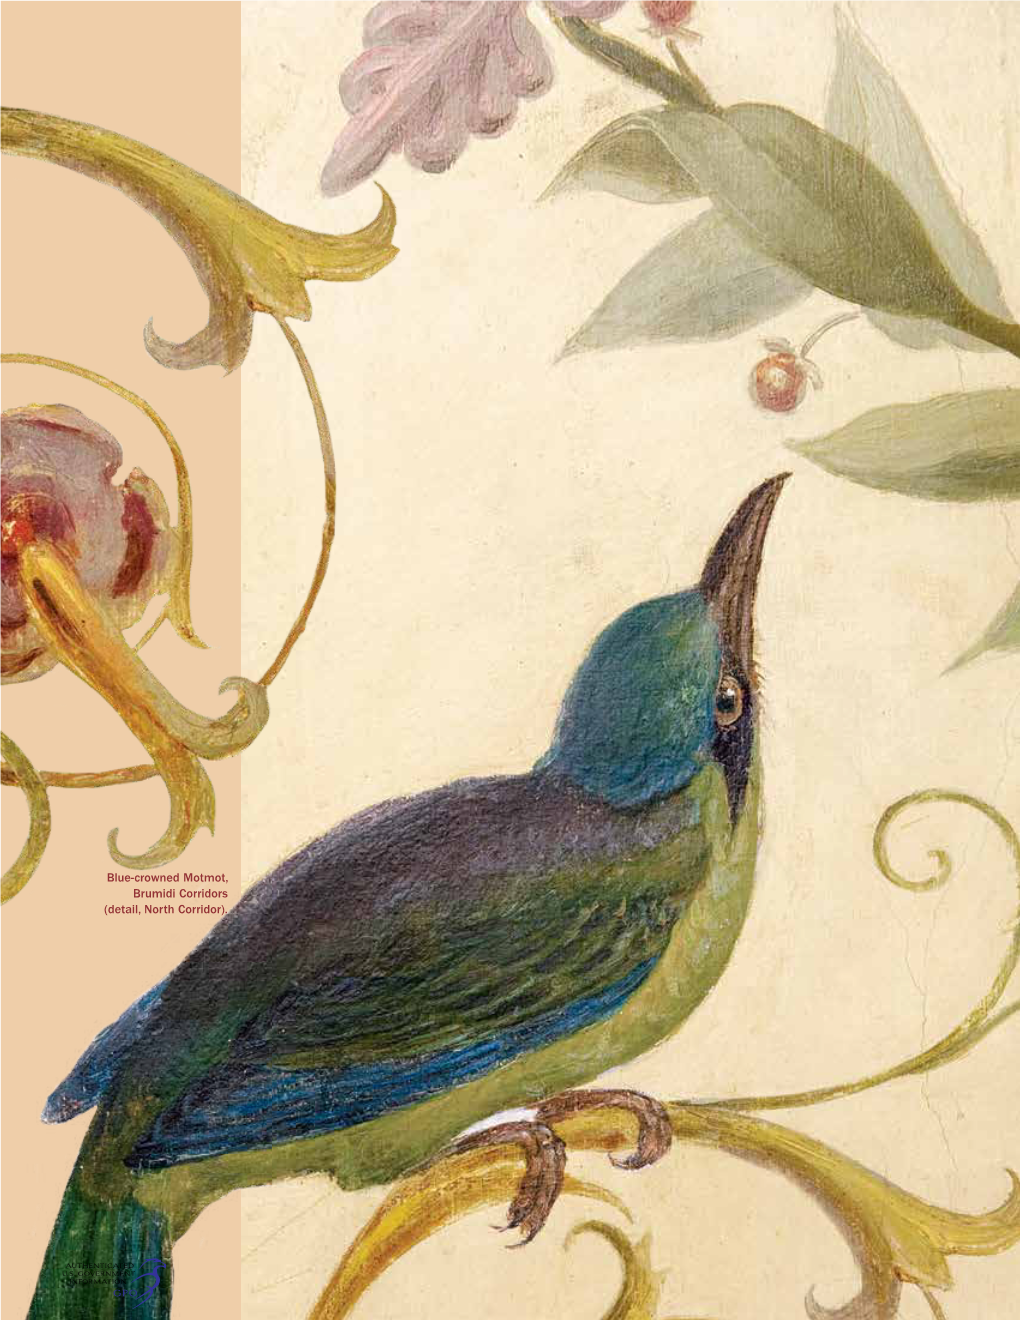 The Unlikely Significance of Brumidi's Motmot